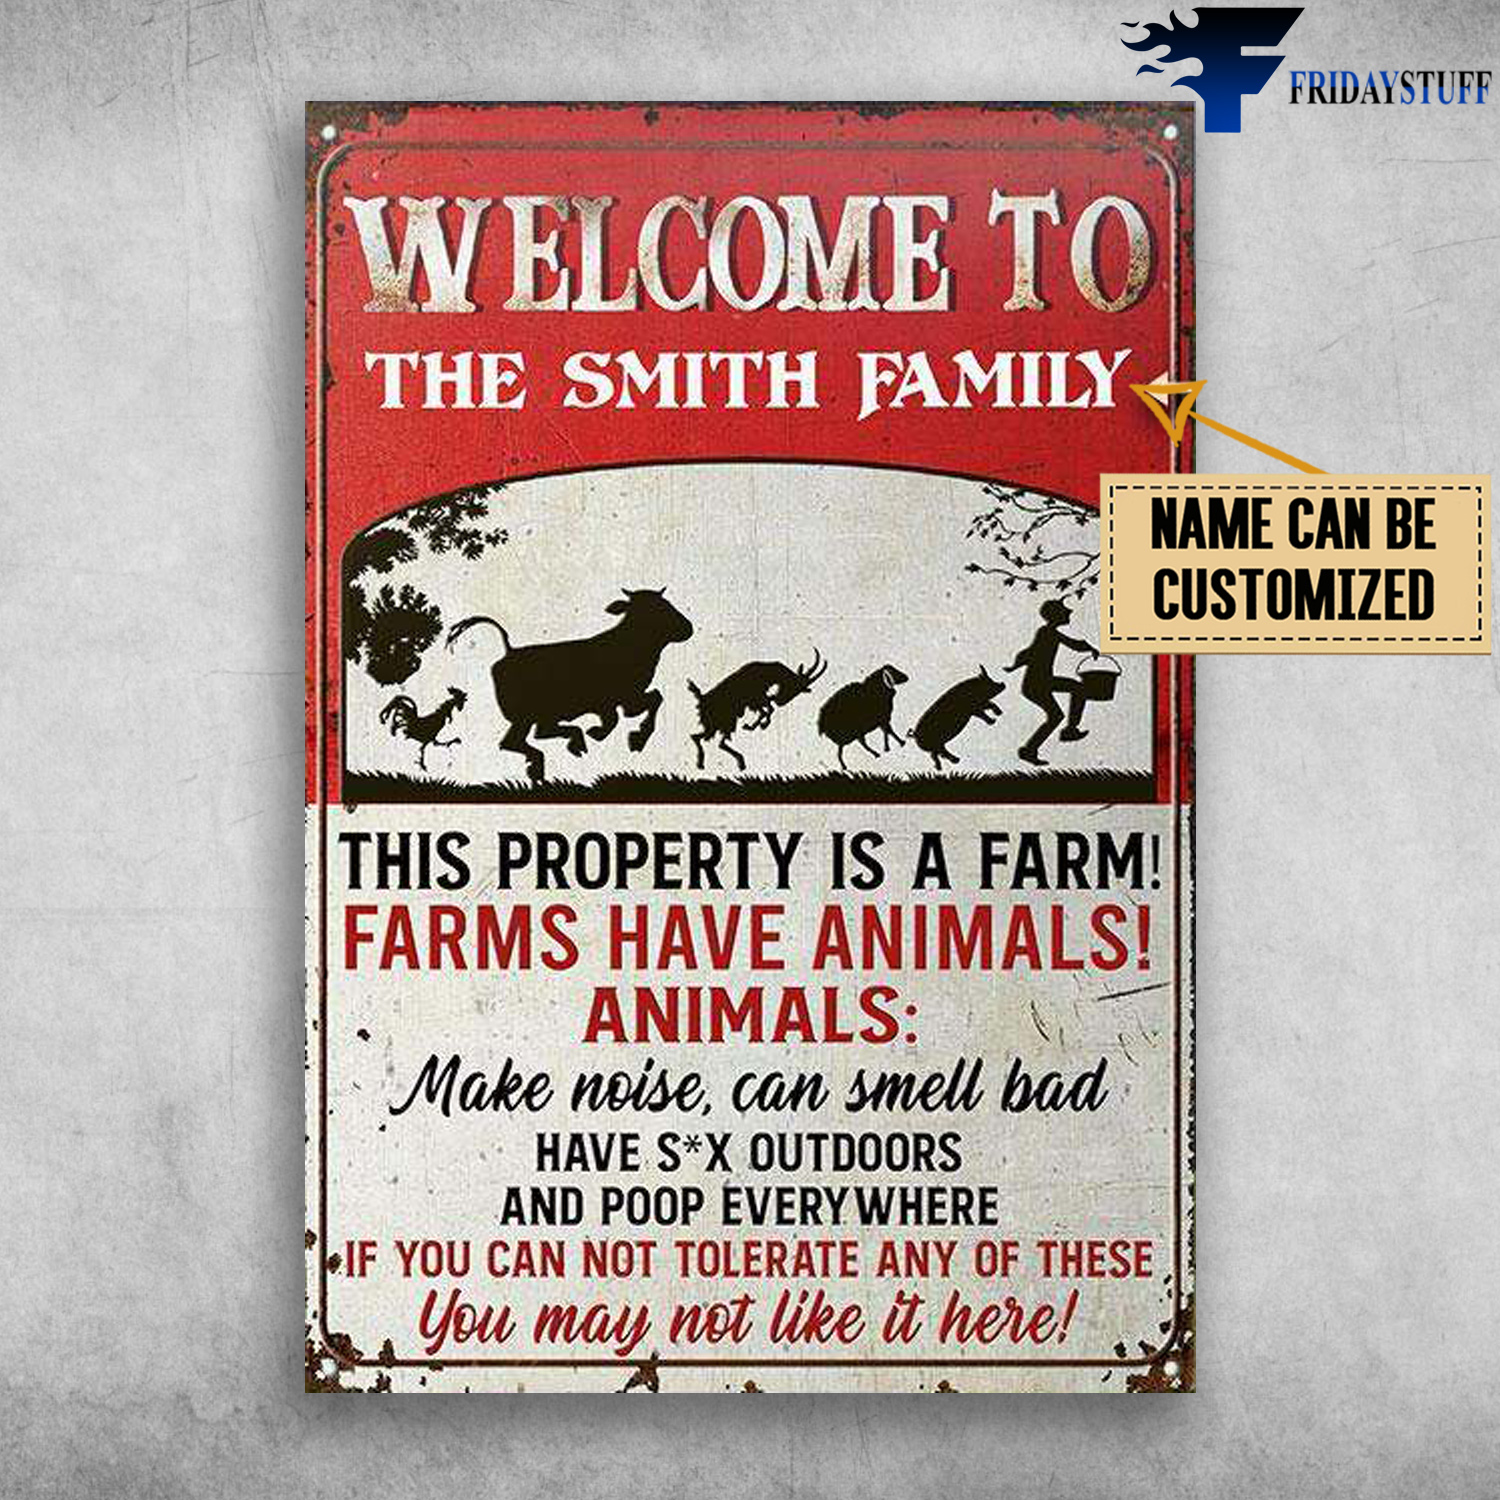 Well Come To The Smith Family, This Property Is A Farm, Farms Have Animals, Animals Make Noise, Can Smell Bad, Have Sex Out Doors, And Poop Everywhere, If You Can Not Tolerate Any Of These, You May Not Like It Here